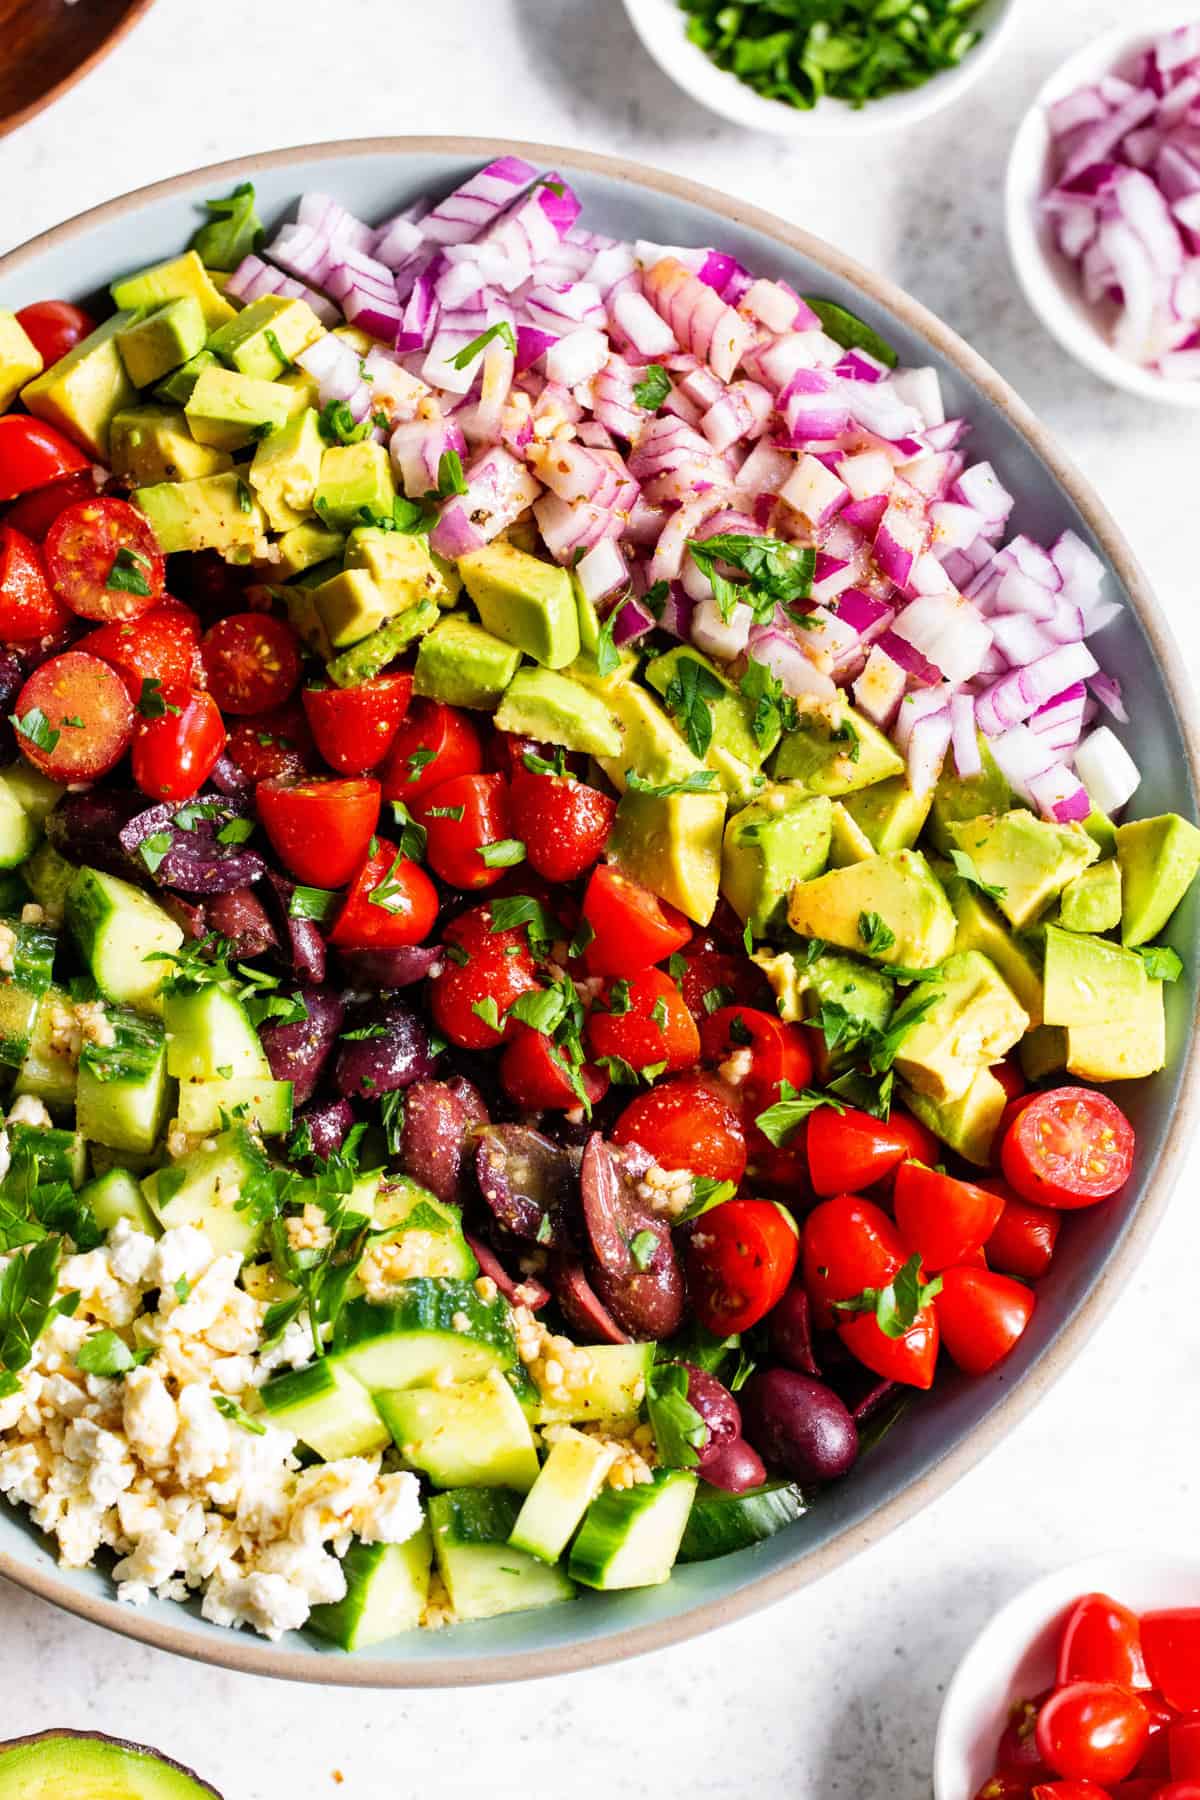 This mediterranean chopped salad has loads of veggies, a flavor packed vinaigrette and vegan feta cheese. It’s perfect to serve to guests, for BBQs, picnics or a light lunch. Make it a full meal by topping with chopped chicken or other protein. Paleo and vegan